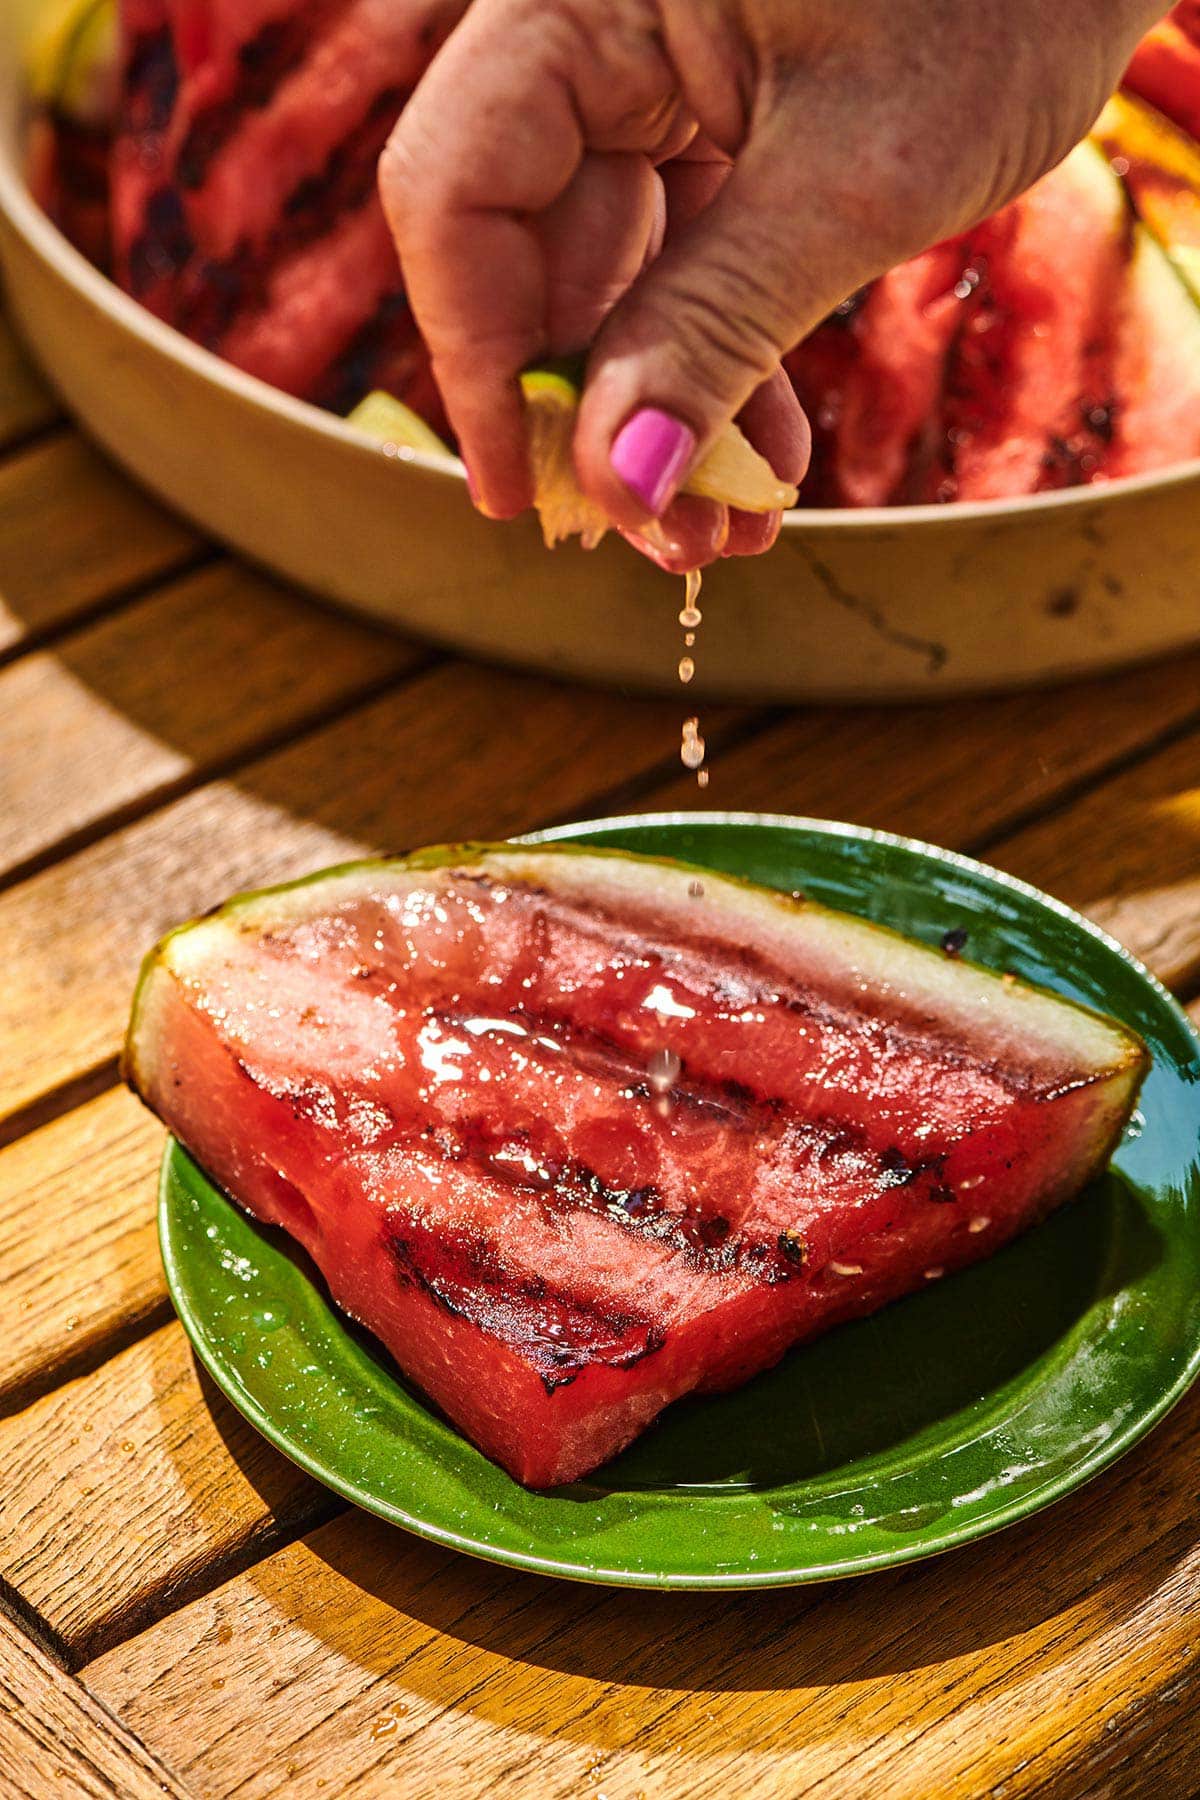 Squeezing fresh lime juice over slice of grilled watermelon at cookout.